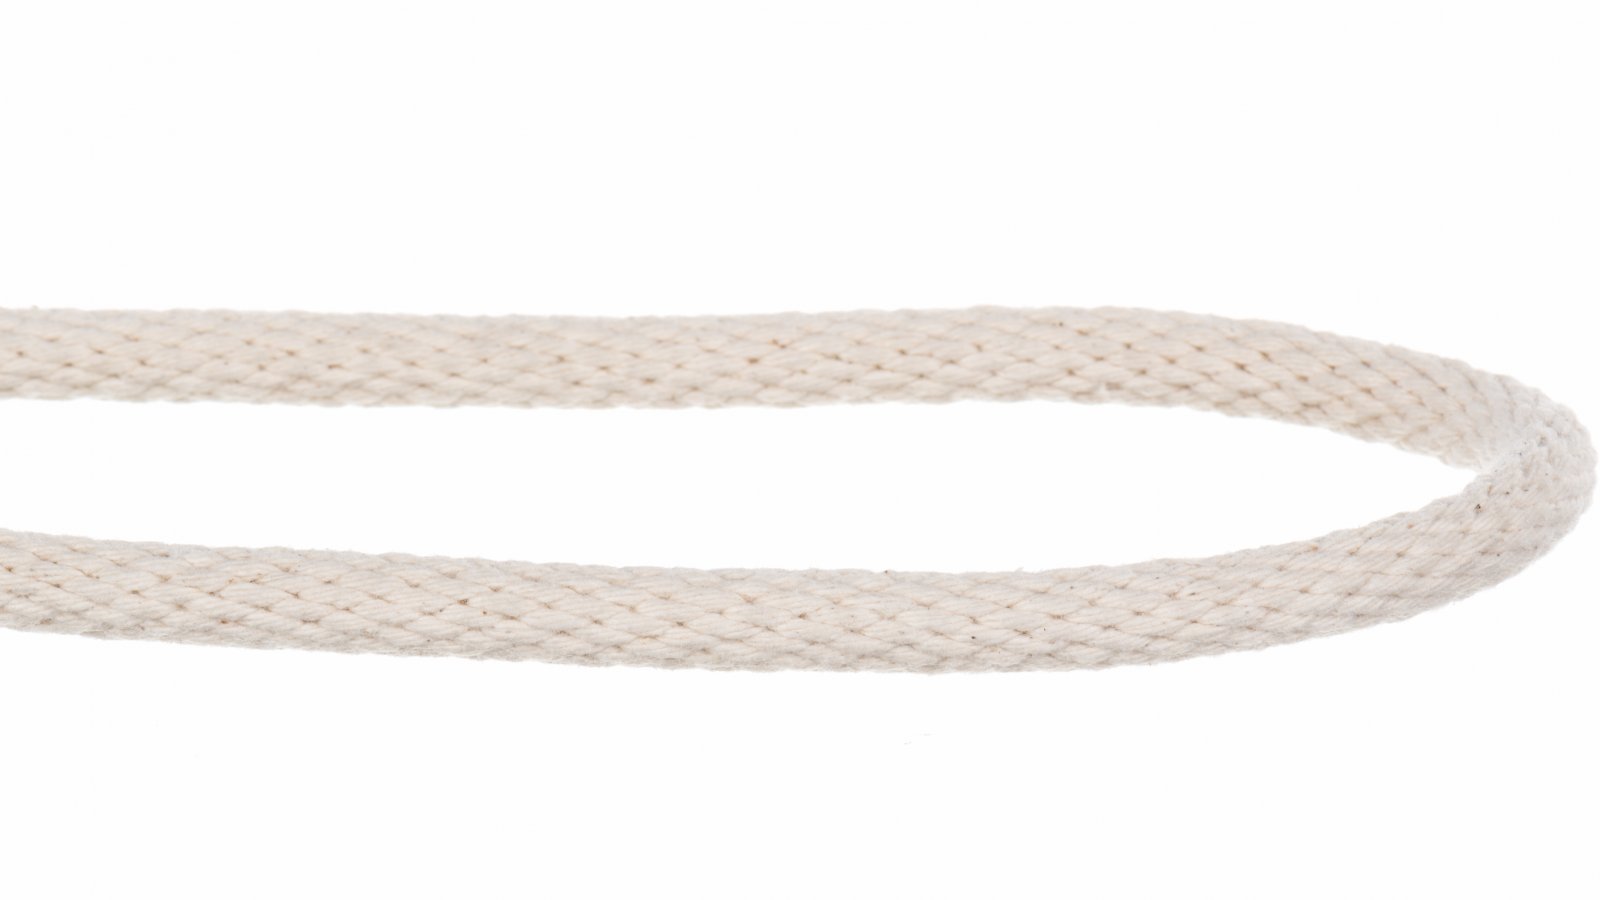 Cotton Solid Braid (100% Cotton) ropes - Lowest prices, free